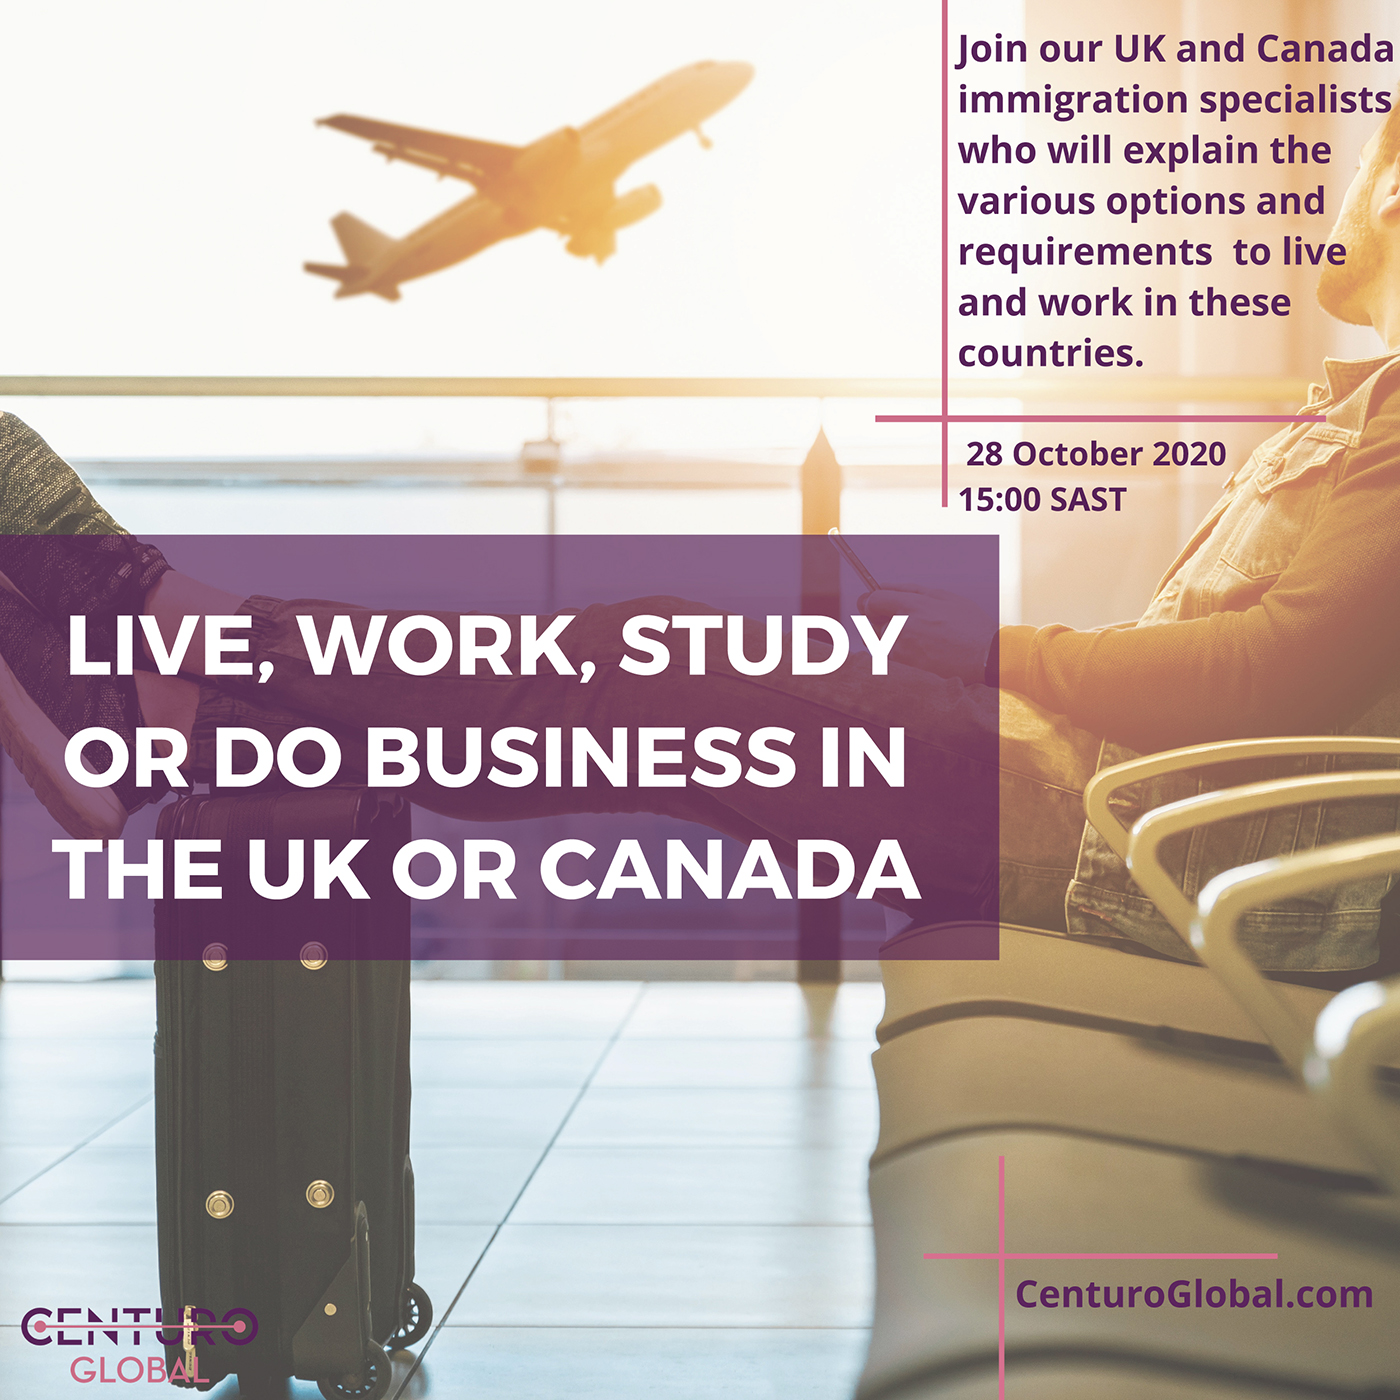 Live, work, Study in the UK or Canada